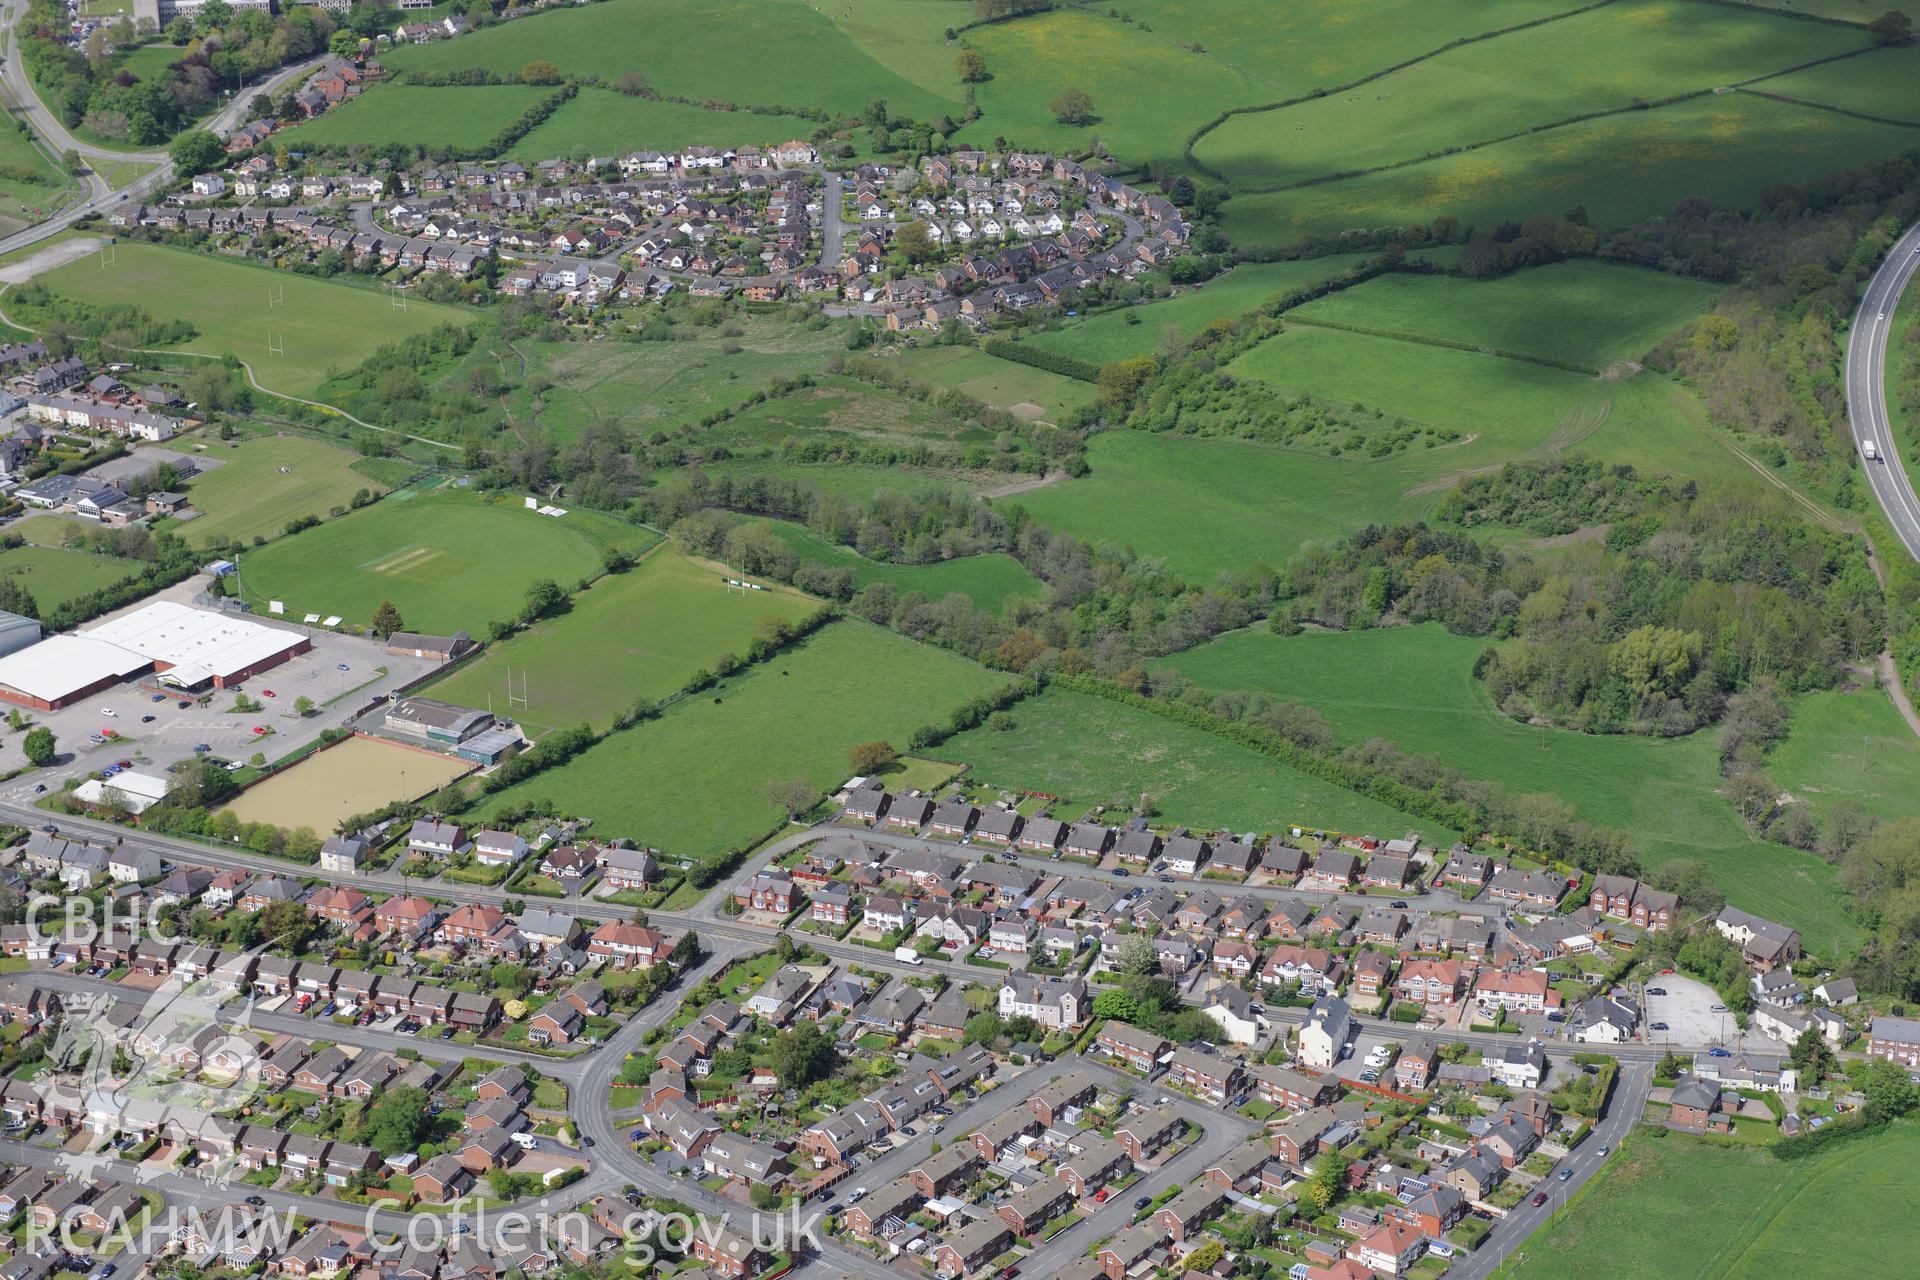 Bryn-yr-Ellyllon Tumulus (findspot of Mold gold cape) and the village of Leadmill, Mold. Oblique aerial photograph taken during the Royal Commission?s programme of archaeological aerial reconnaissance by Toby Driver on 22nd May 2013.